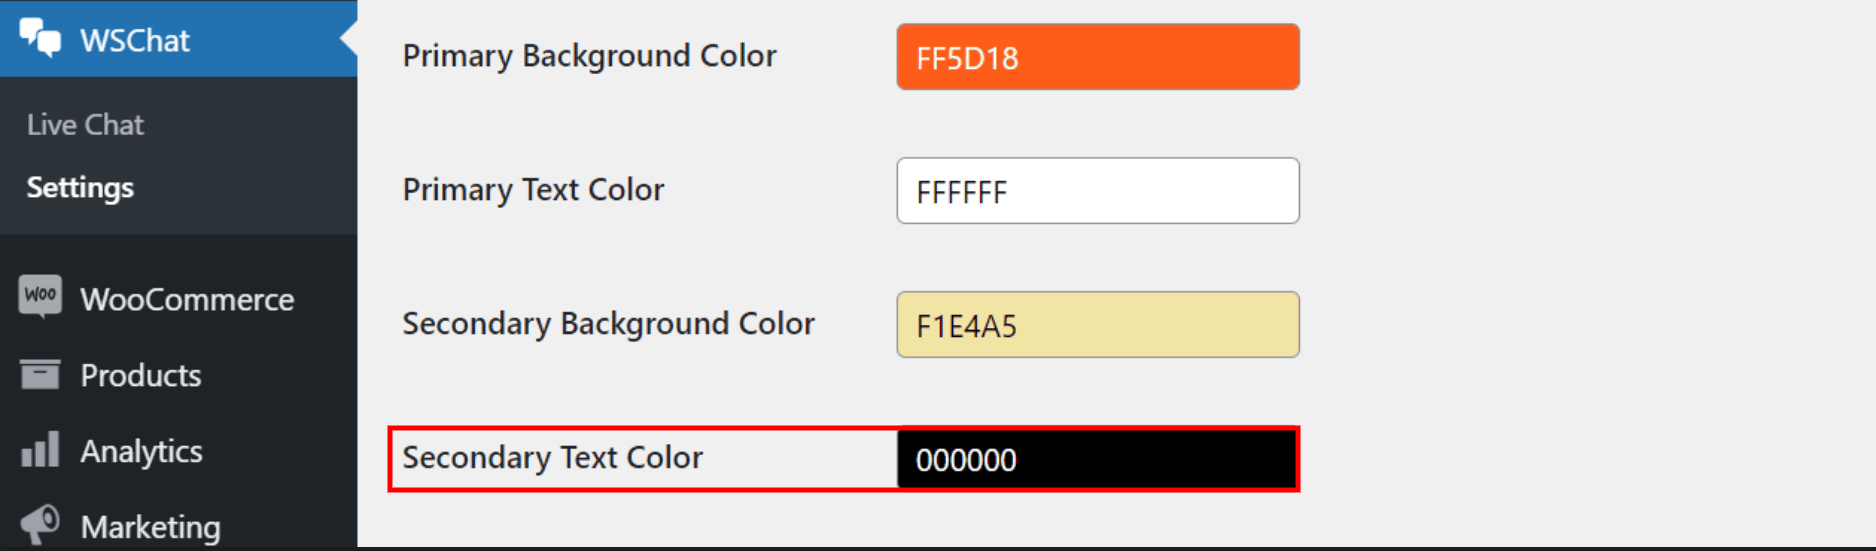 Secondary Text Color